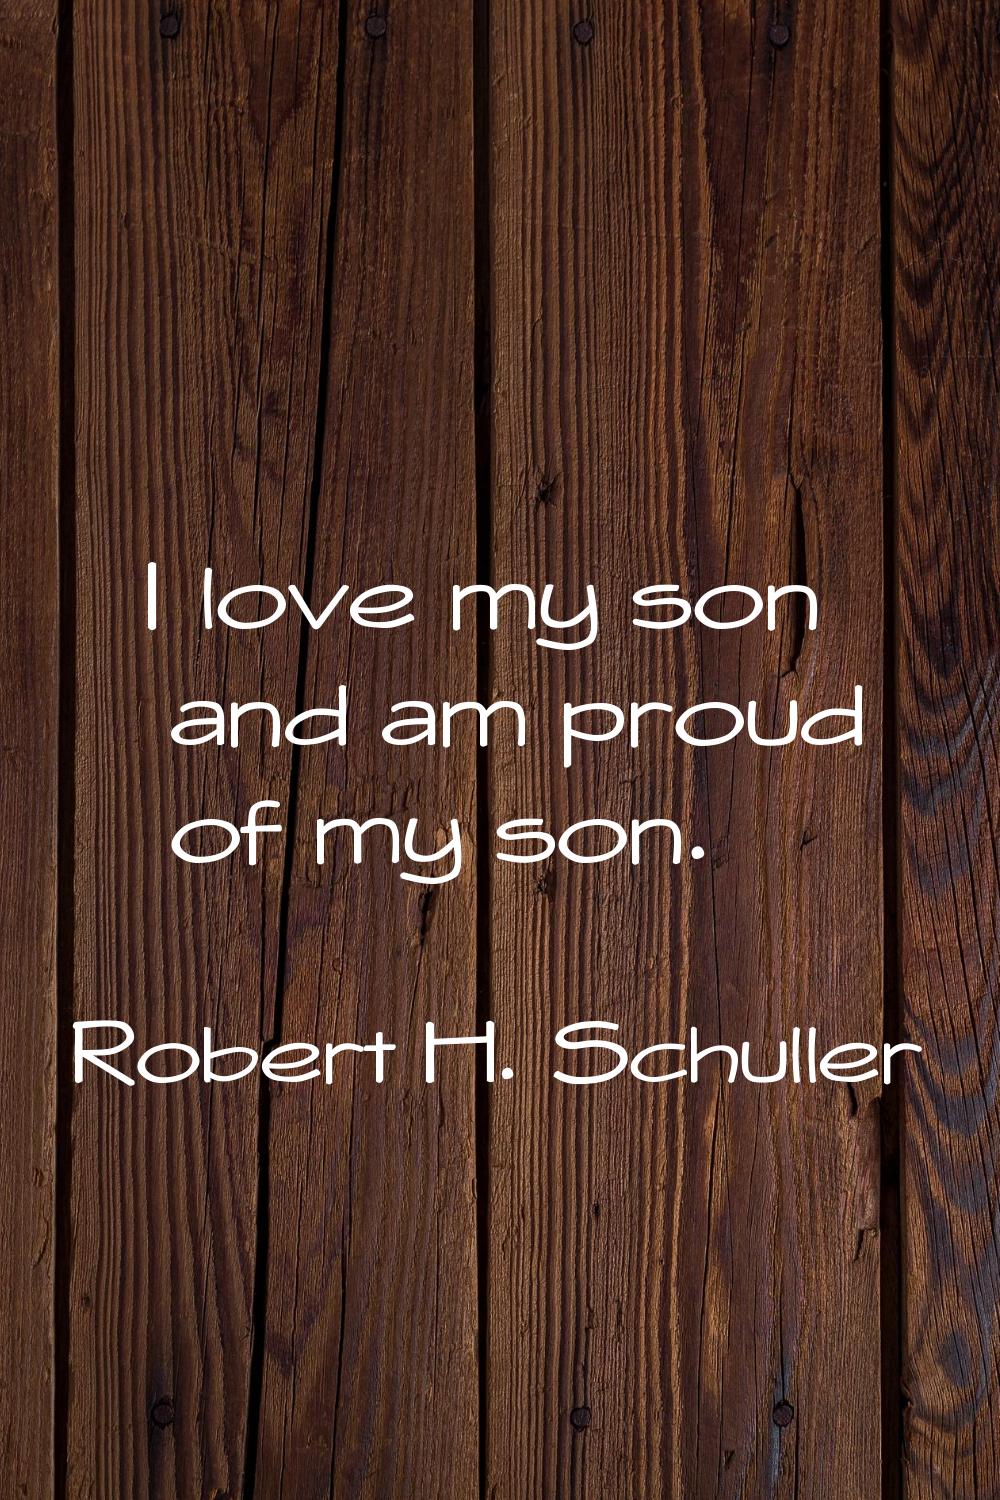 I love my son and am proud of my son.